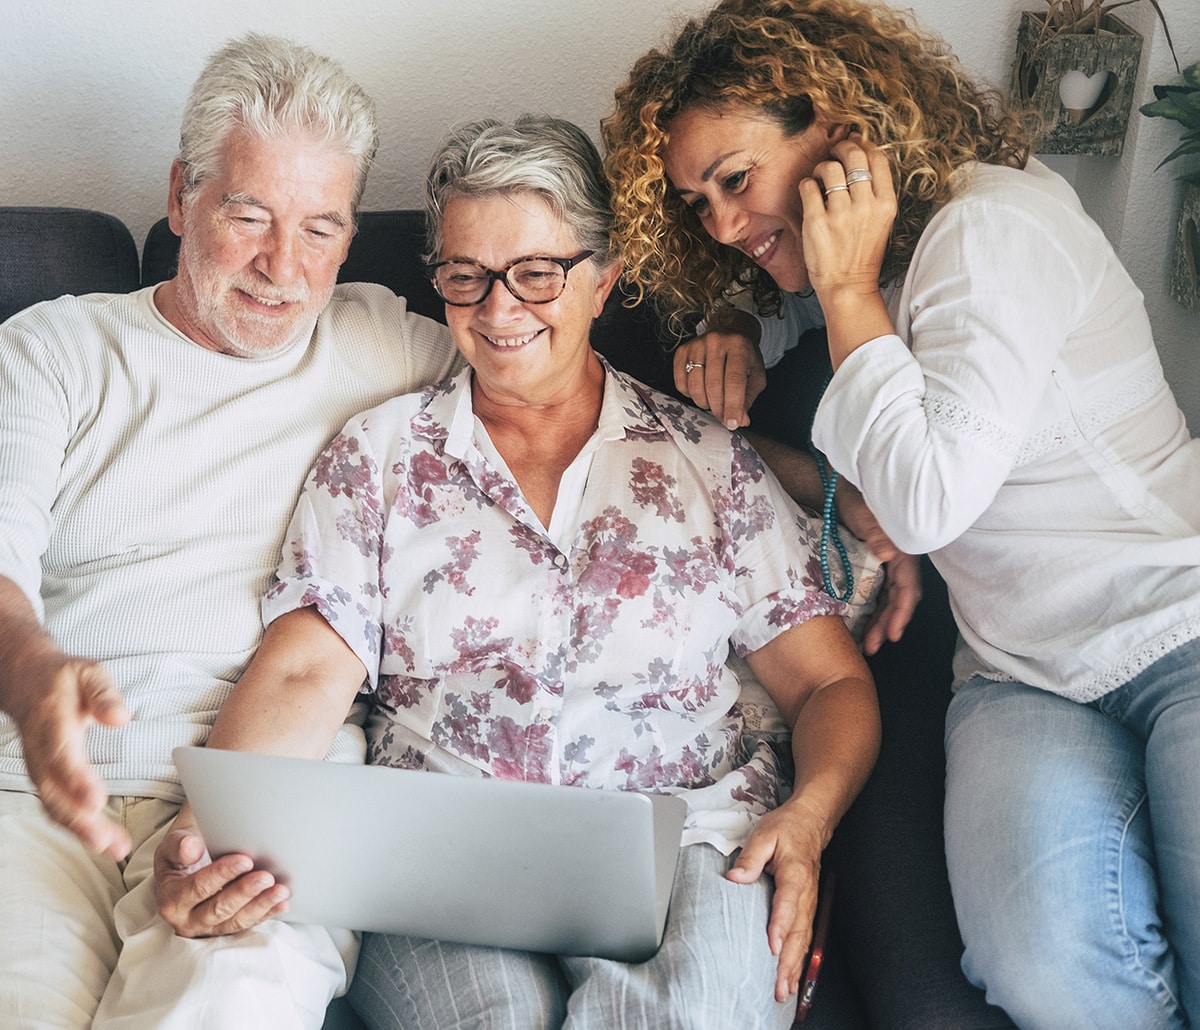 Connect Our Elders Advisory Process in Bellevue, Seattle, Kirkland, Issaquah, Tacoma, Federal Way, Edmonds, Olympia, Redmond, Woodinville and all of Western Washington.